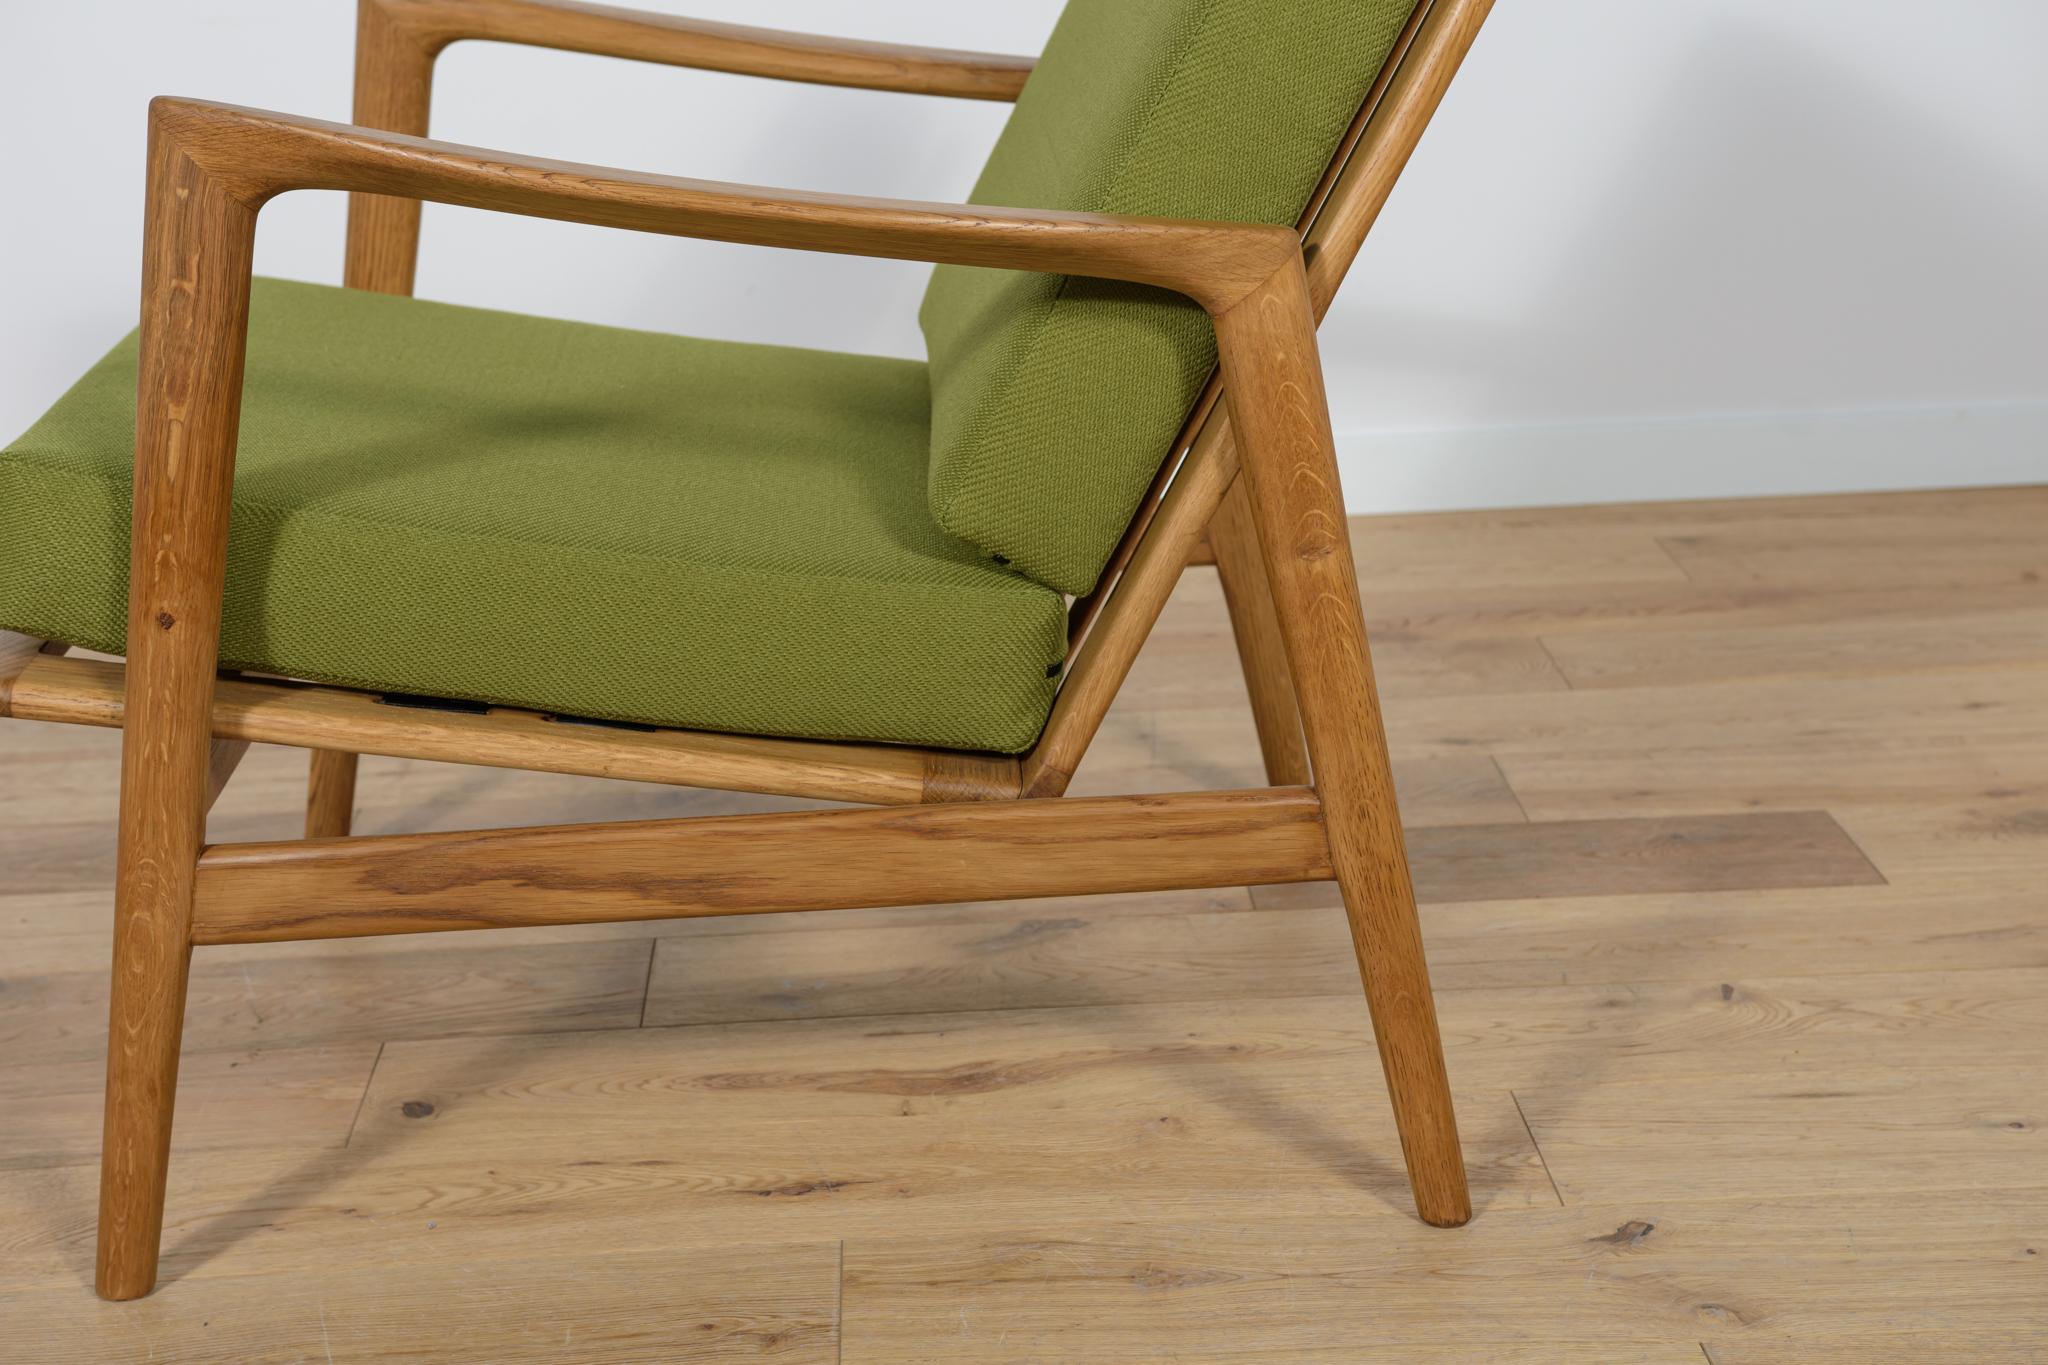 Mid-20th Century Model 300-139 Armchair from Swarzędz Factory, 1960s For Sale